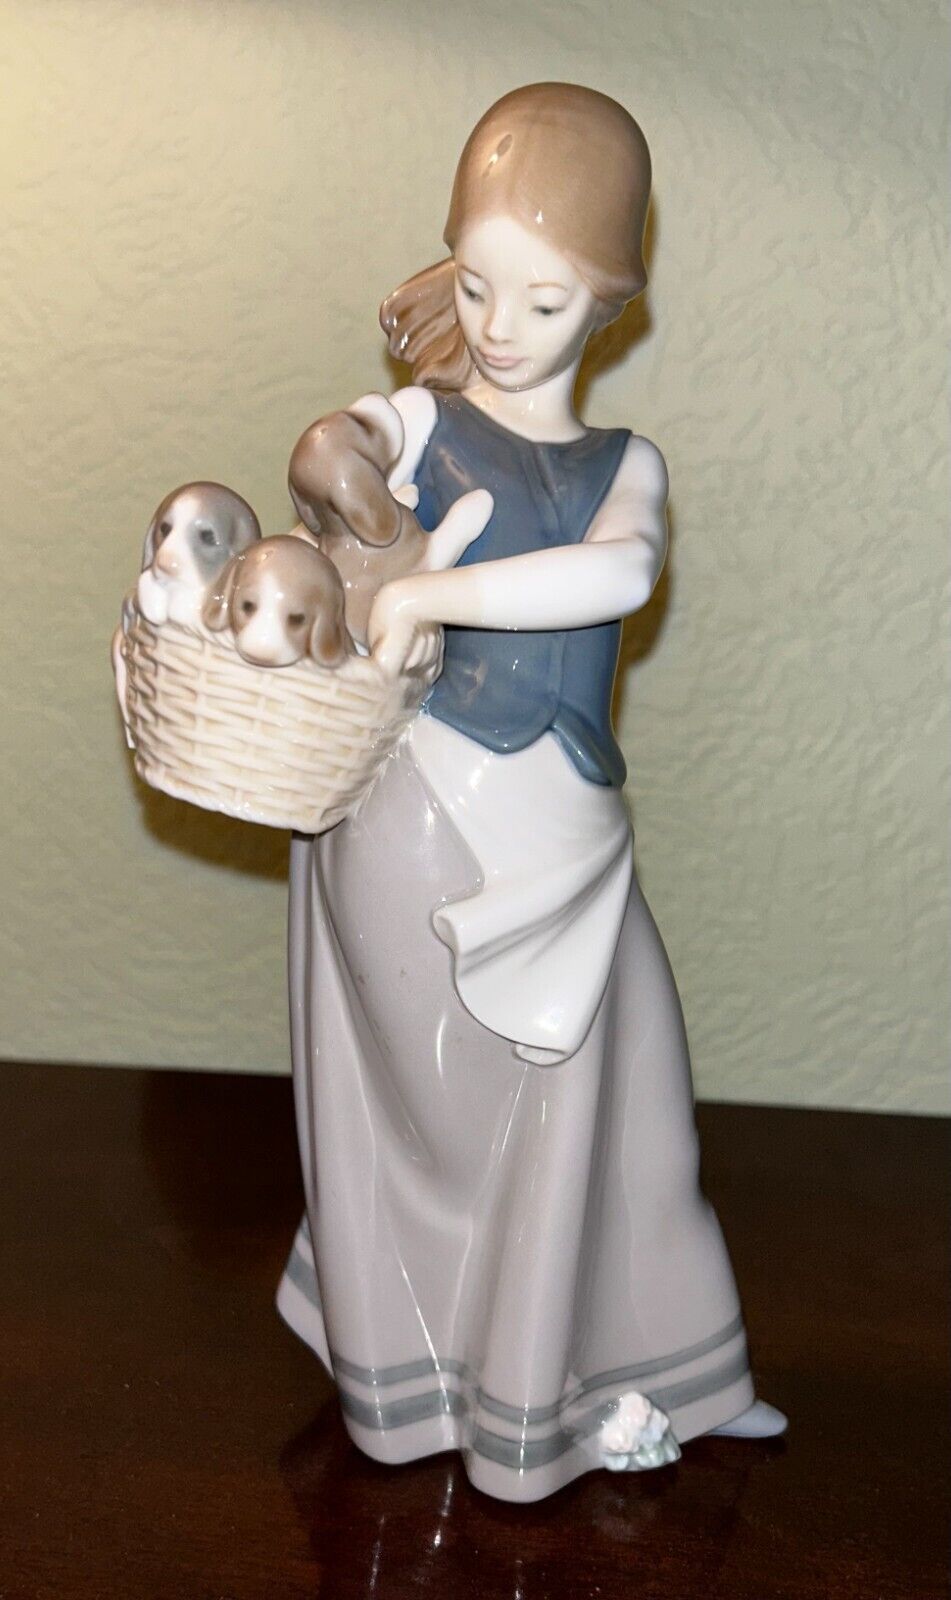 Lladro Figurine 1311 Girl With Basket of Puppies on Hip Retired 1977. No Box